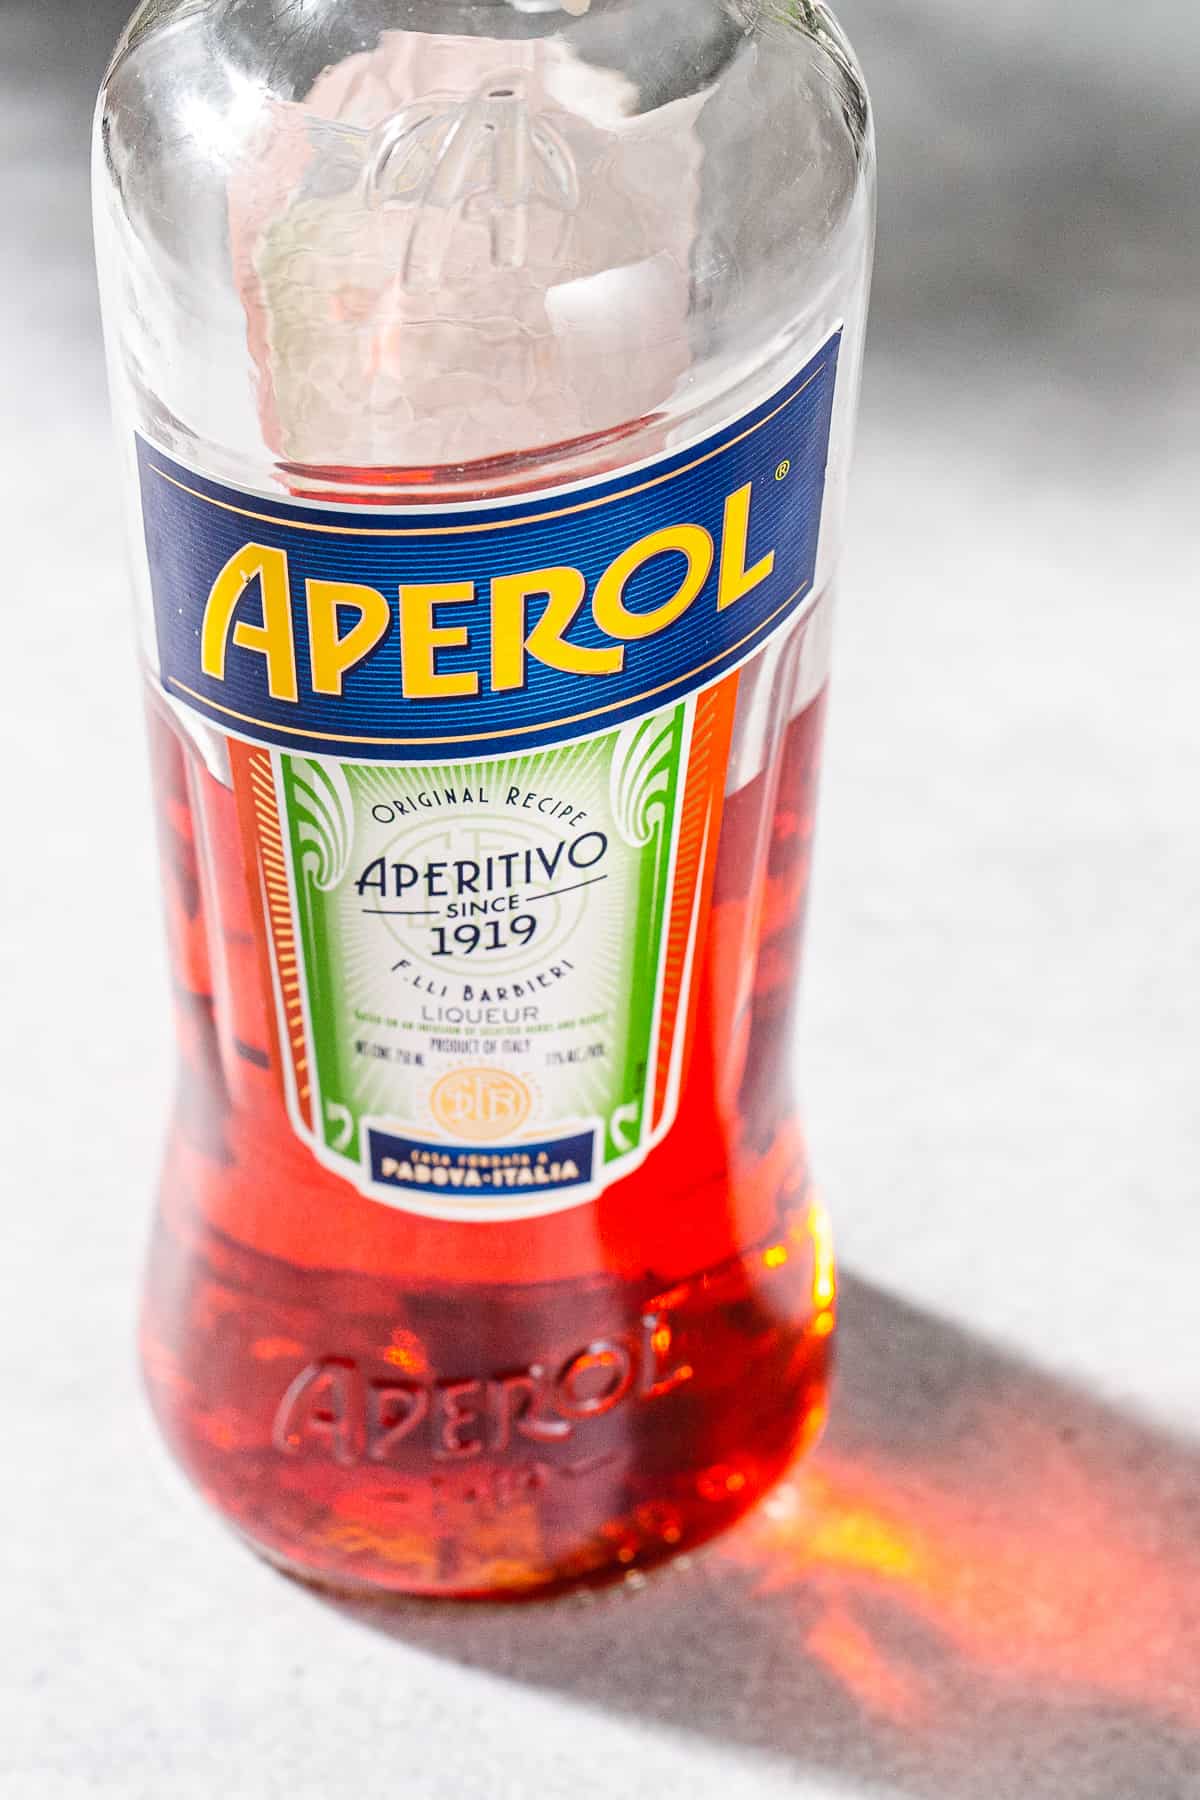 Close up of a bottle of Aperol liqueur. The bottle is half full of red liquid.